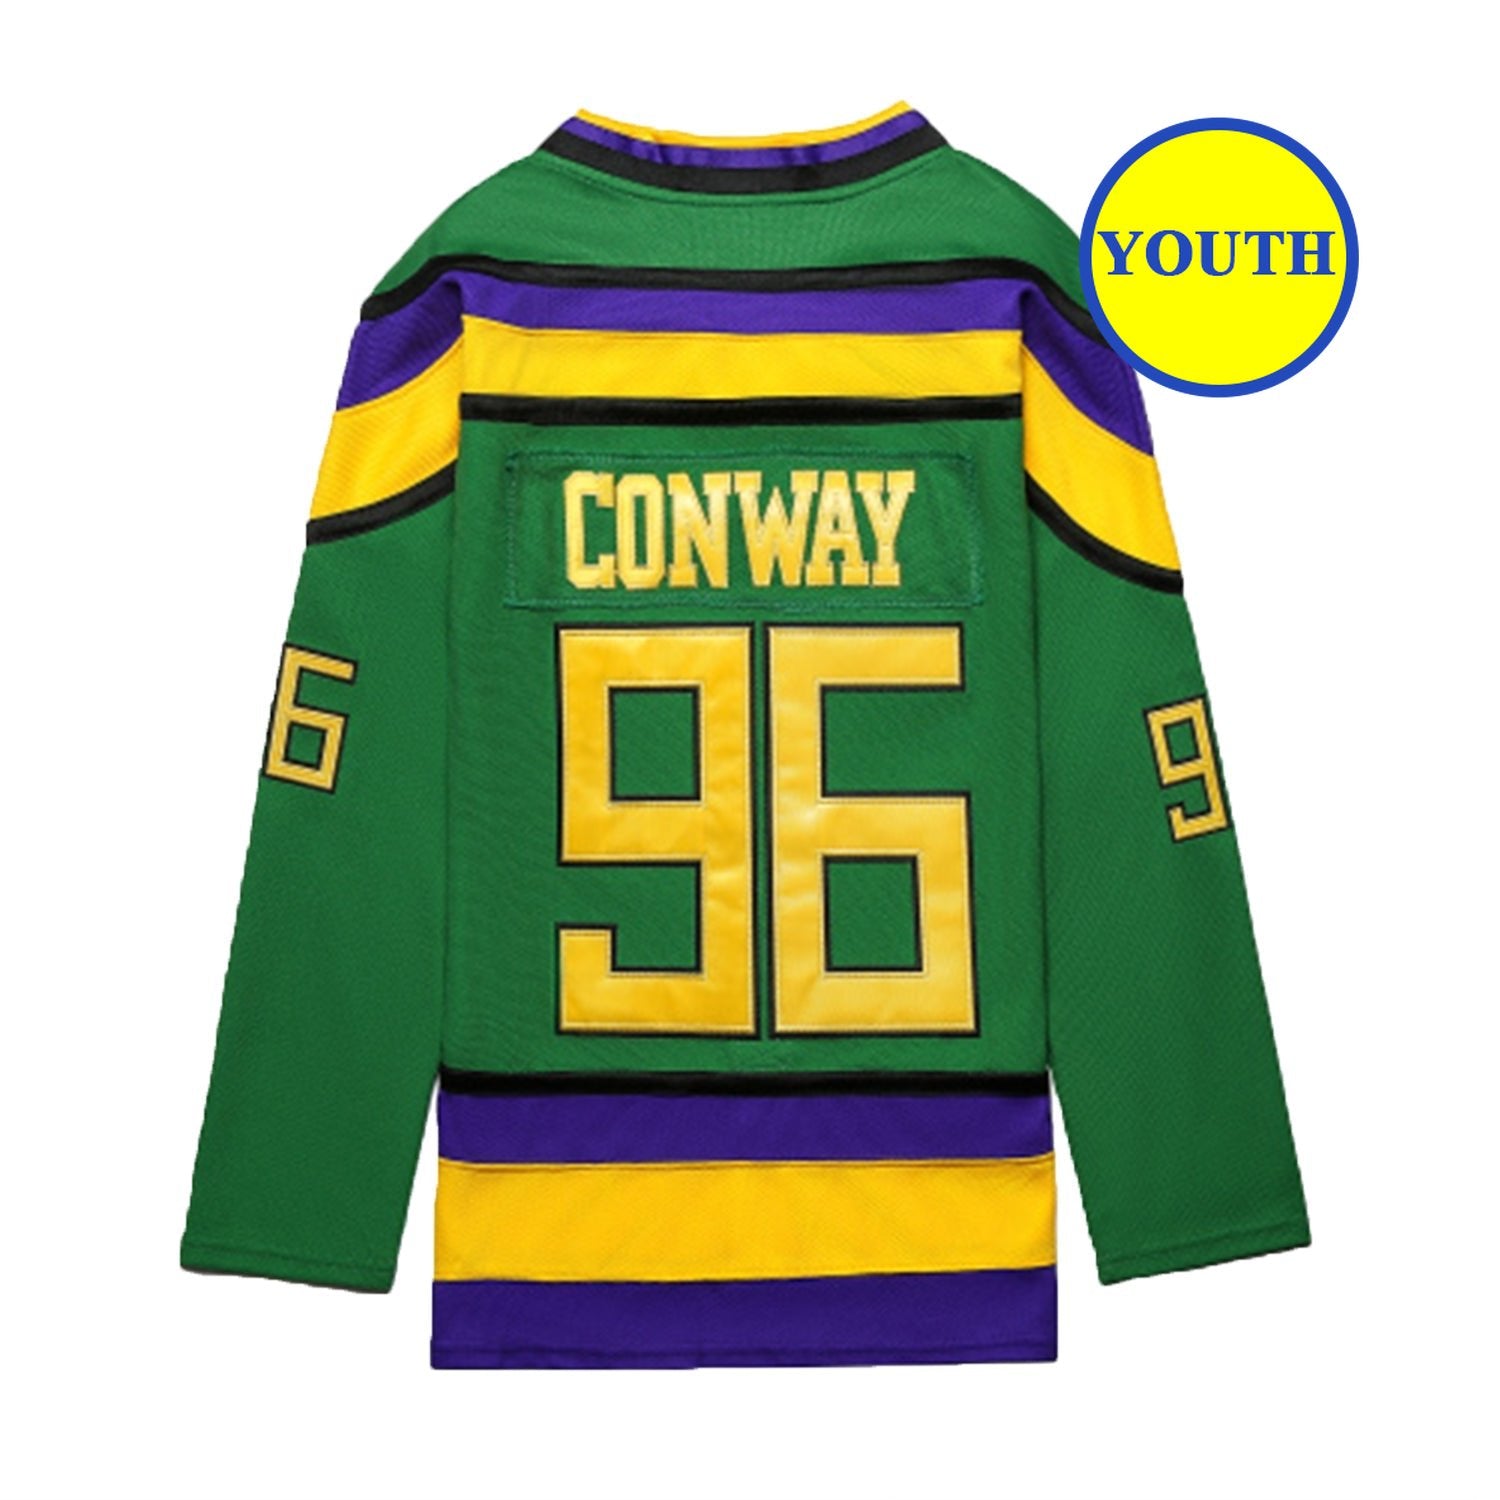 Mighty Ducks #96 Conway T-Shirt Small 18